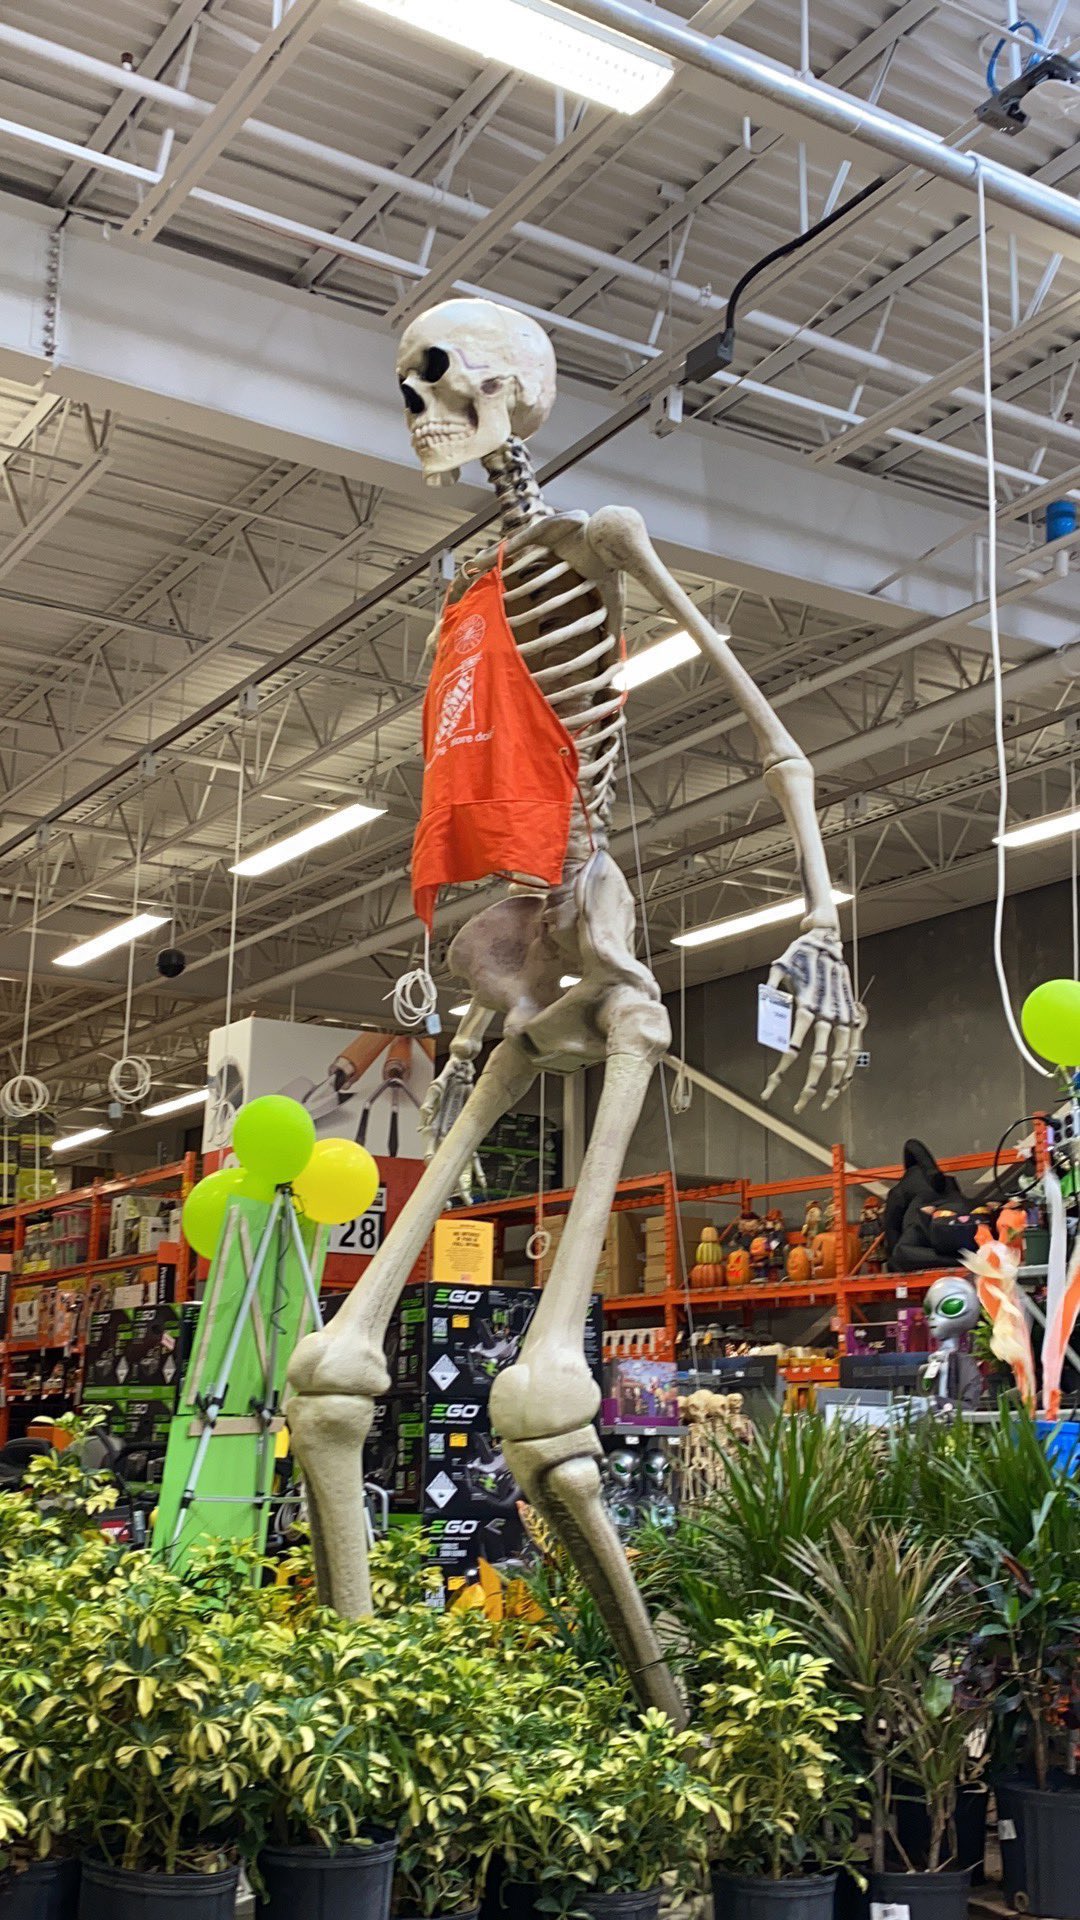 The Best Halloween Decoration of 2020? - 106.3 The Fox